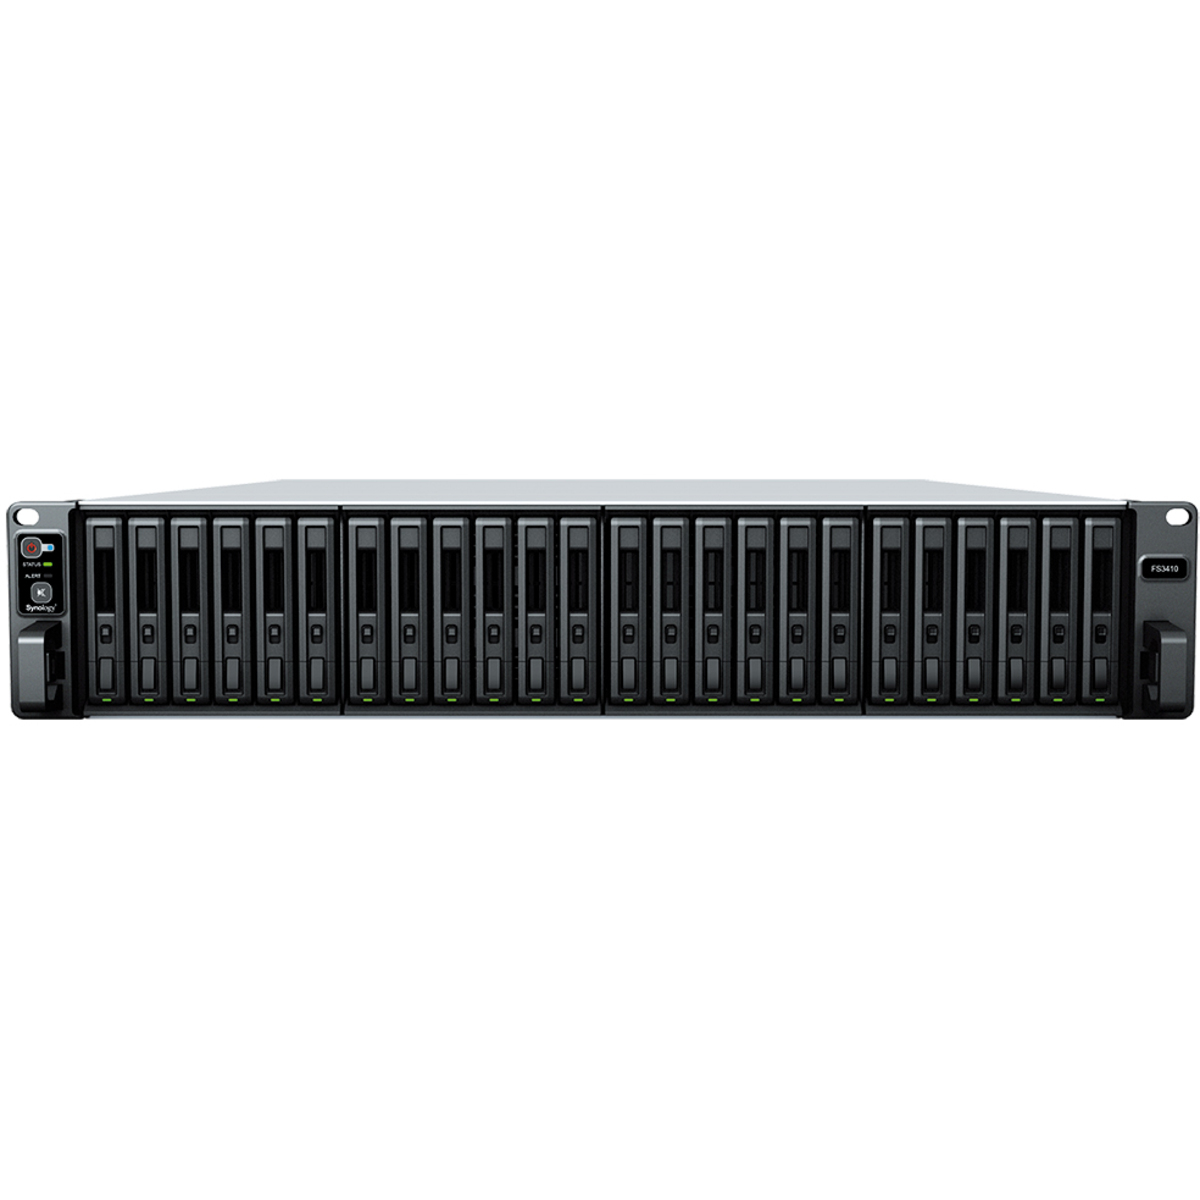 Synology FlashStation FS3410 72tb 24-Bay RackMount Large Business / Enterprise NAS - Network Attached Storage Device 18x4tb Sandisk Ultra 3D SDSSDH3-4T00 2.5 560/520MB/s SATA 6Gb/s SSD CONSUMER Class Drives Installed - Burn-In Tested FlashStation FS3410